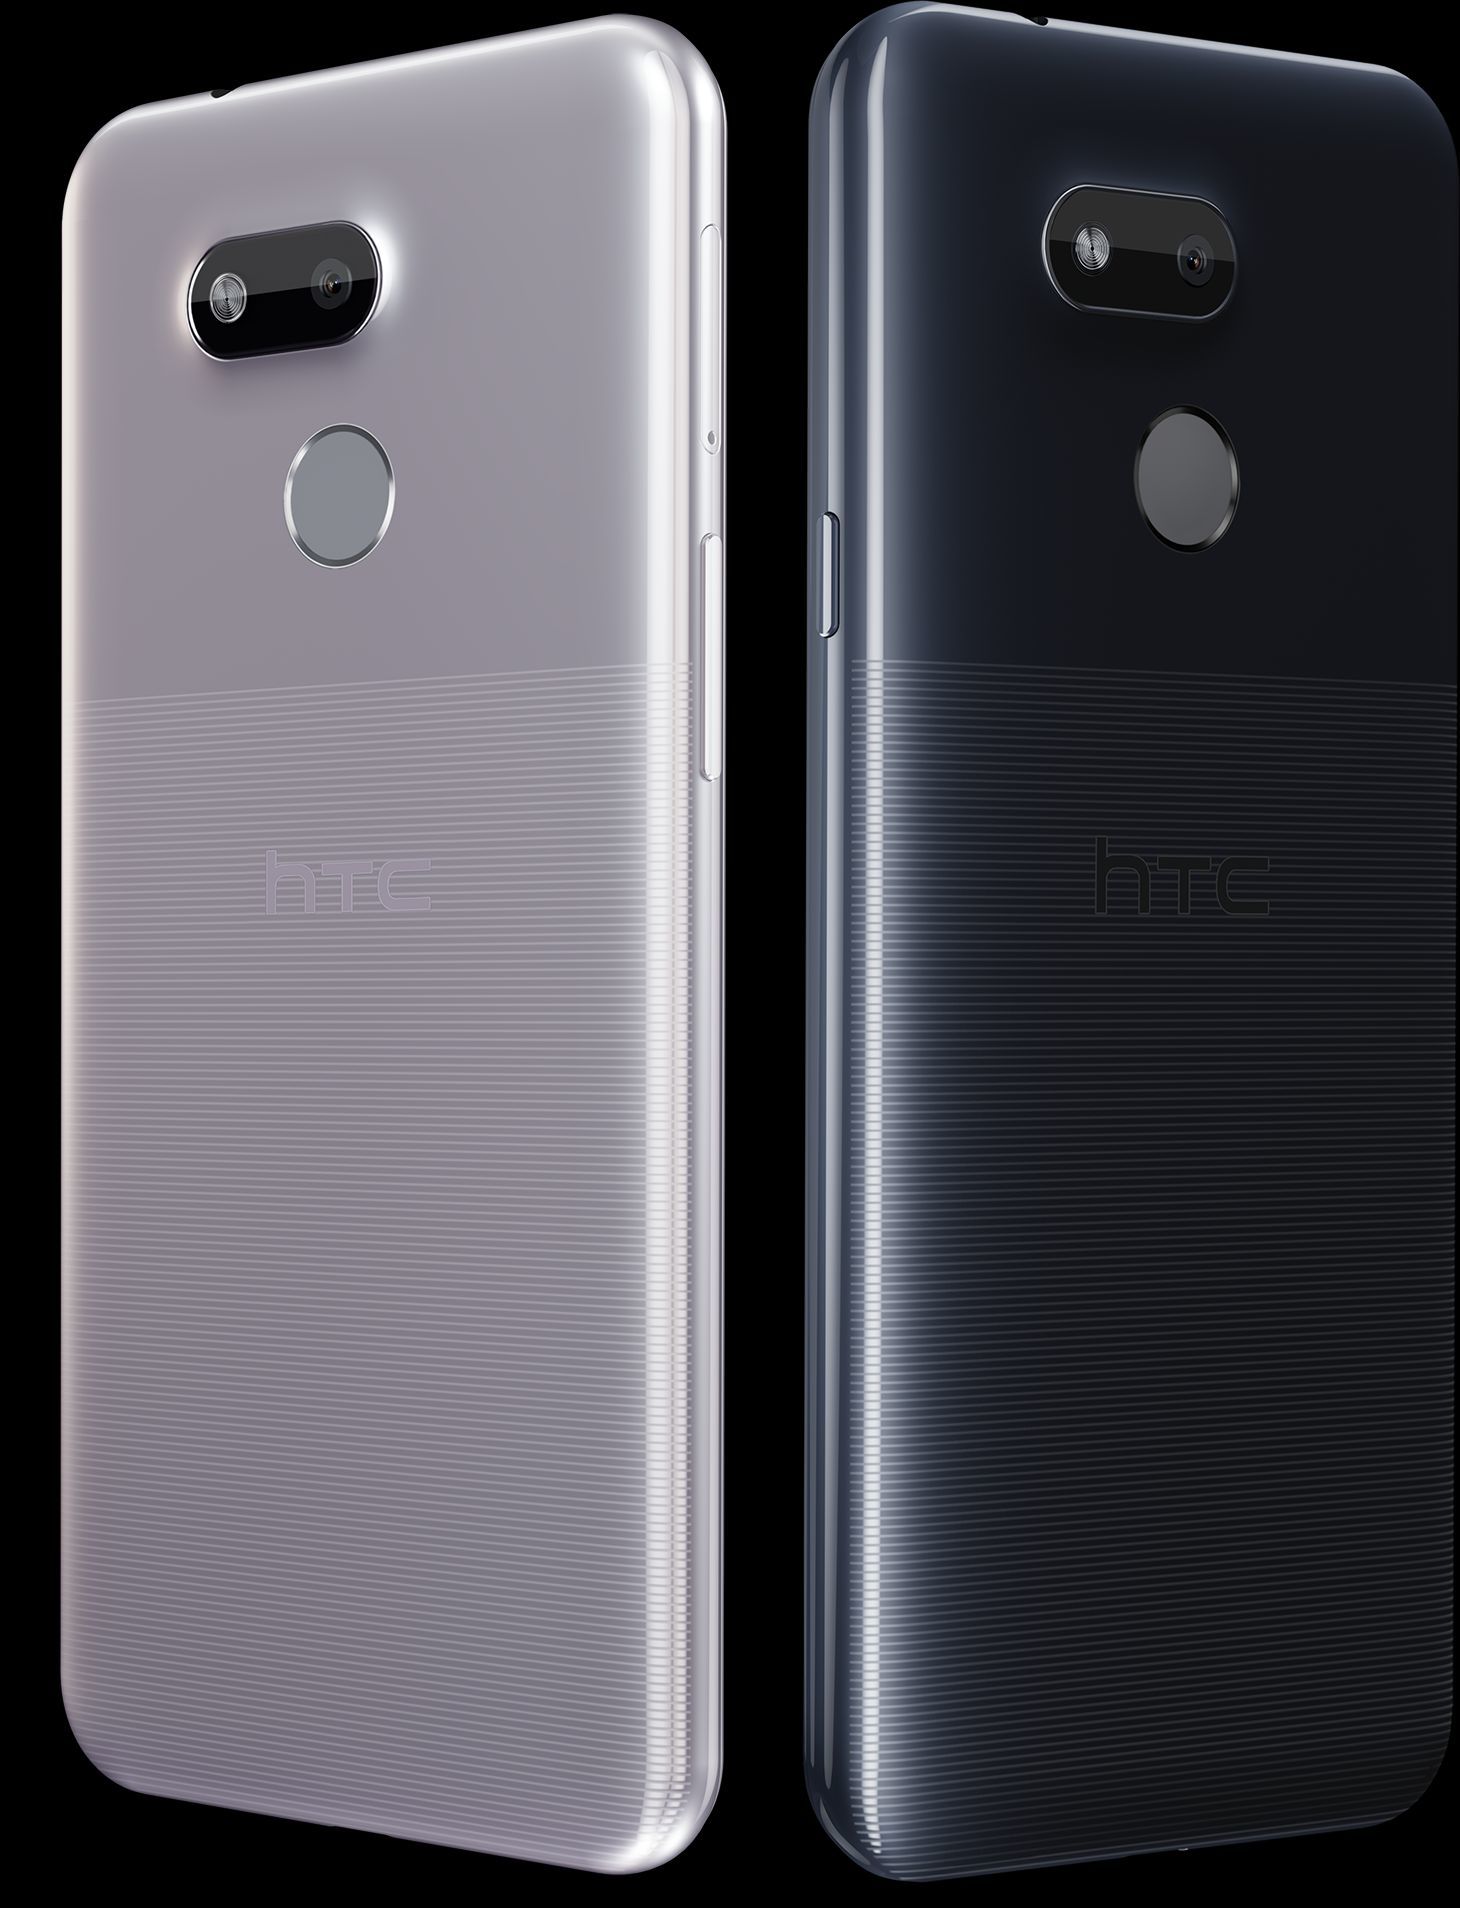 Htc Desire 12s Introduced With A Sleek Design, Ordinary Specs And Compact Pricing